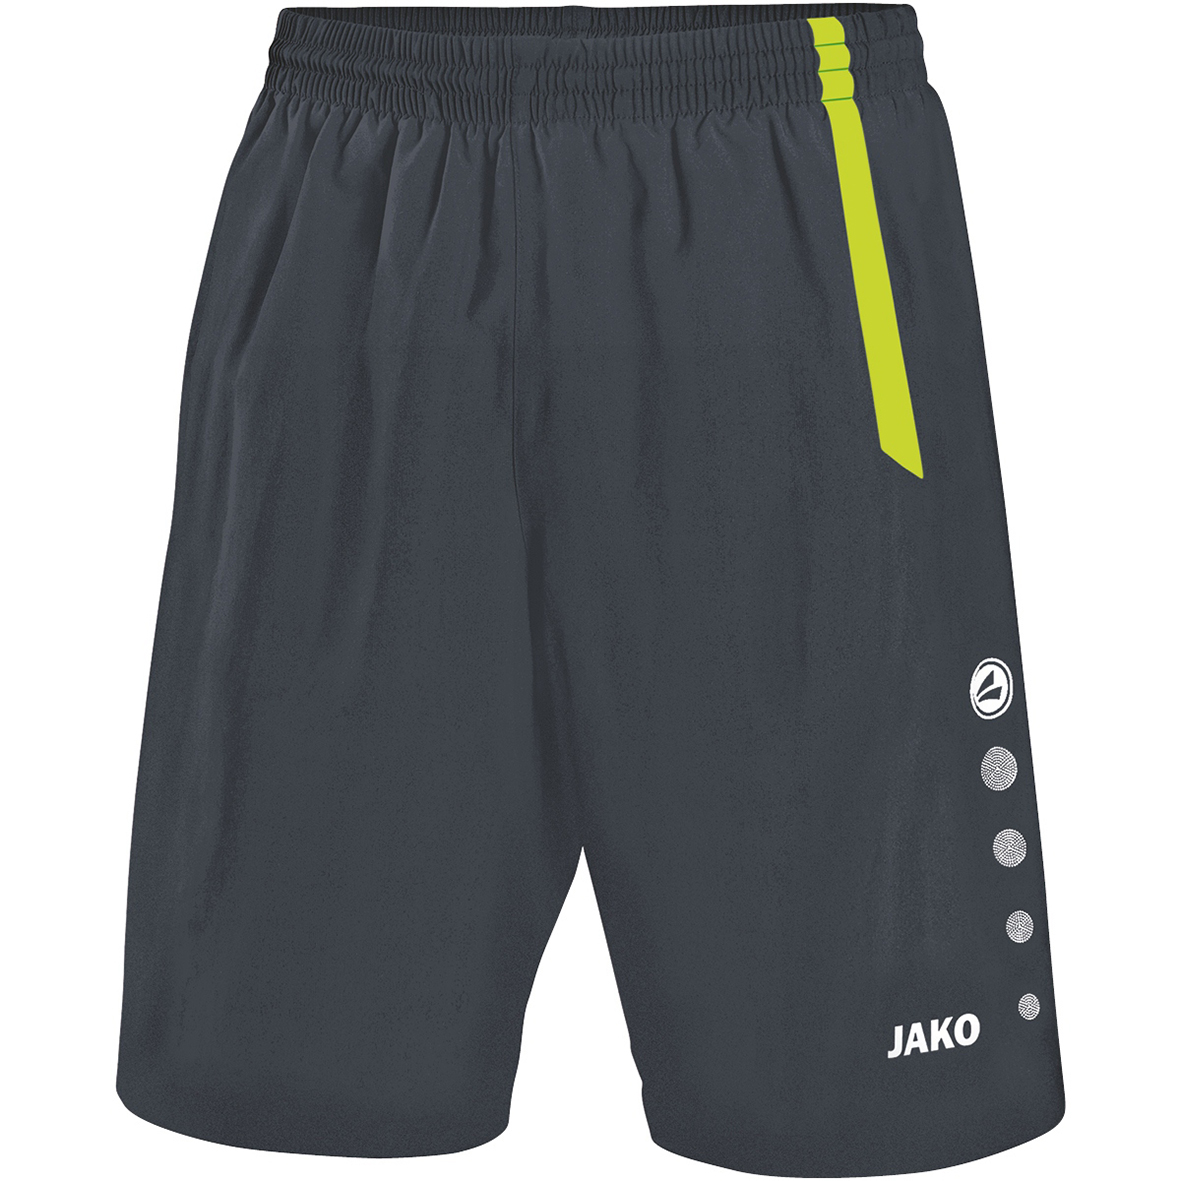 SHORTS JAKO TURIN, ANTHRACITE-LIME KIDS.